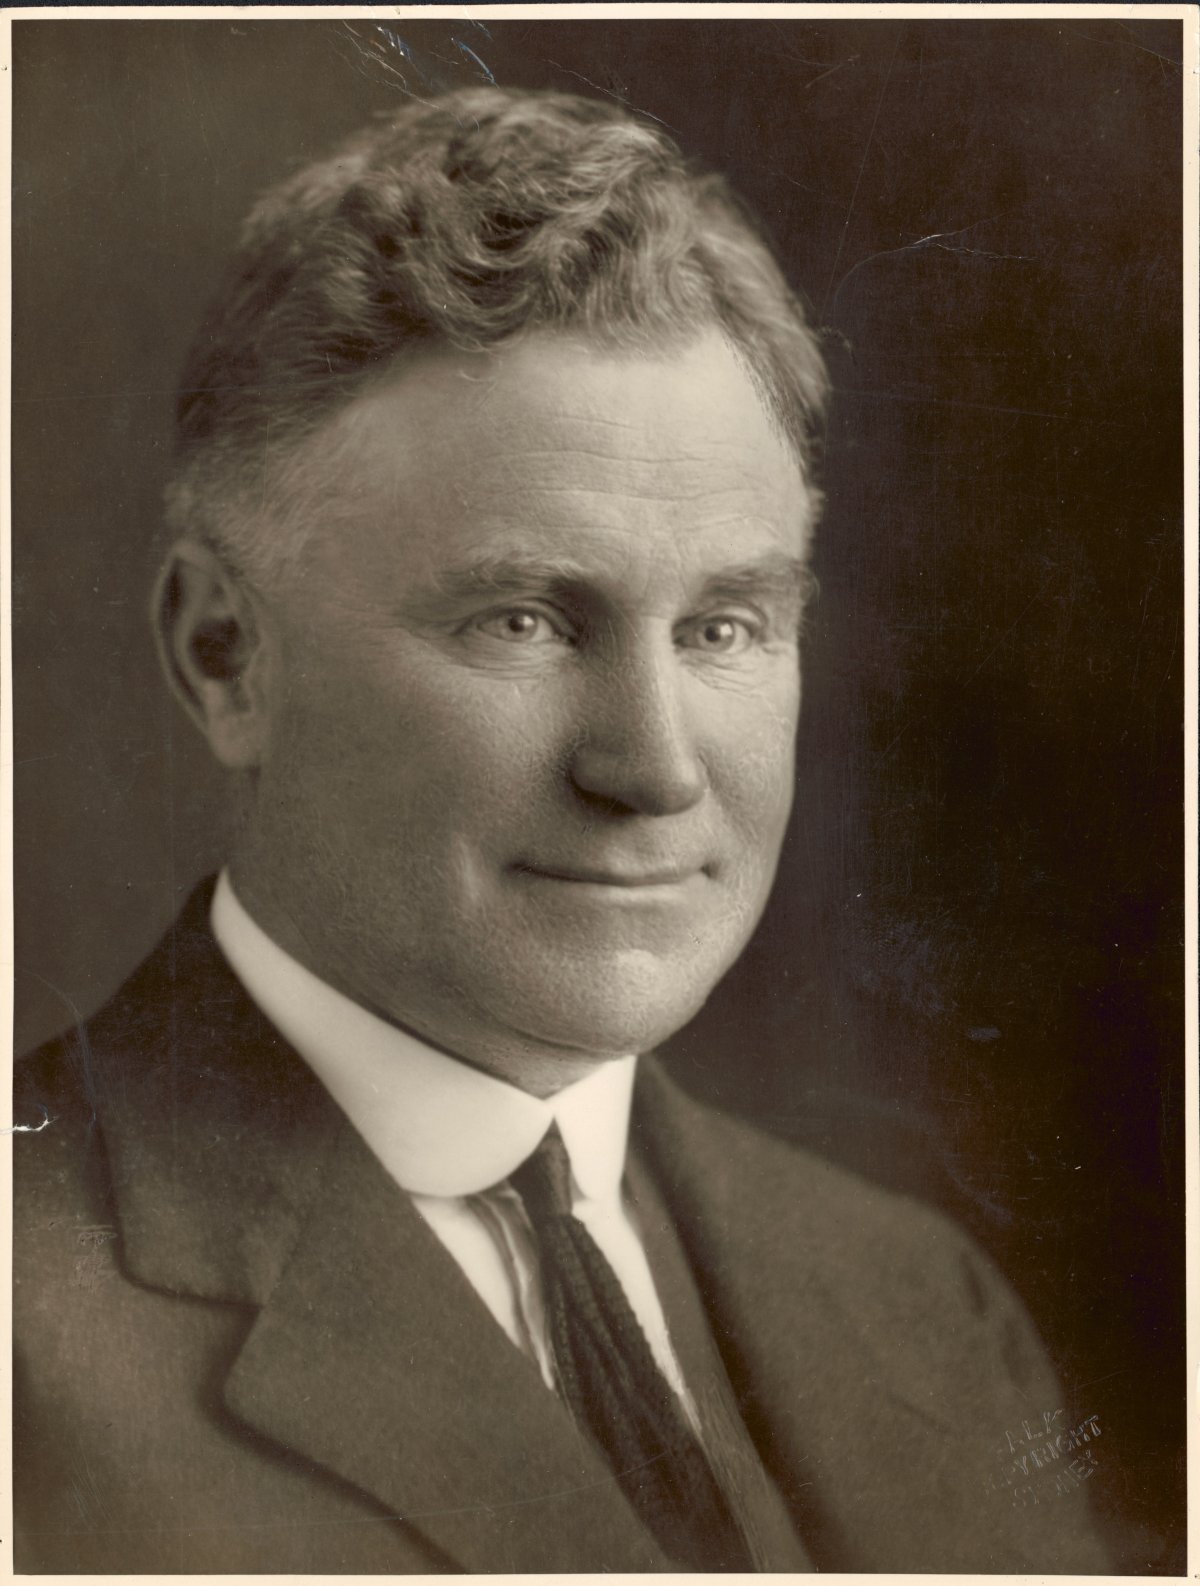 A formal portrait of Sir Earle Page, leader of the Country Party in 1939. He is a middle-aged white male with blonde wavy hair neatly groomed. He is wearing a light coloured suit with a dark tie and white shirt. He stares off camera